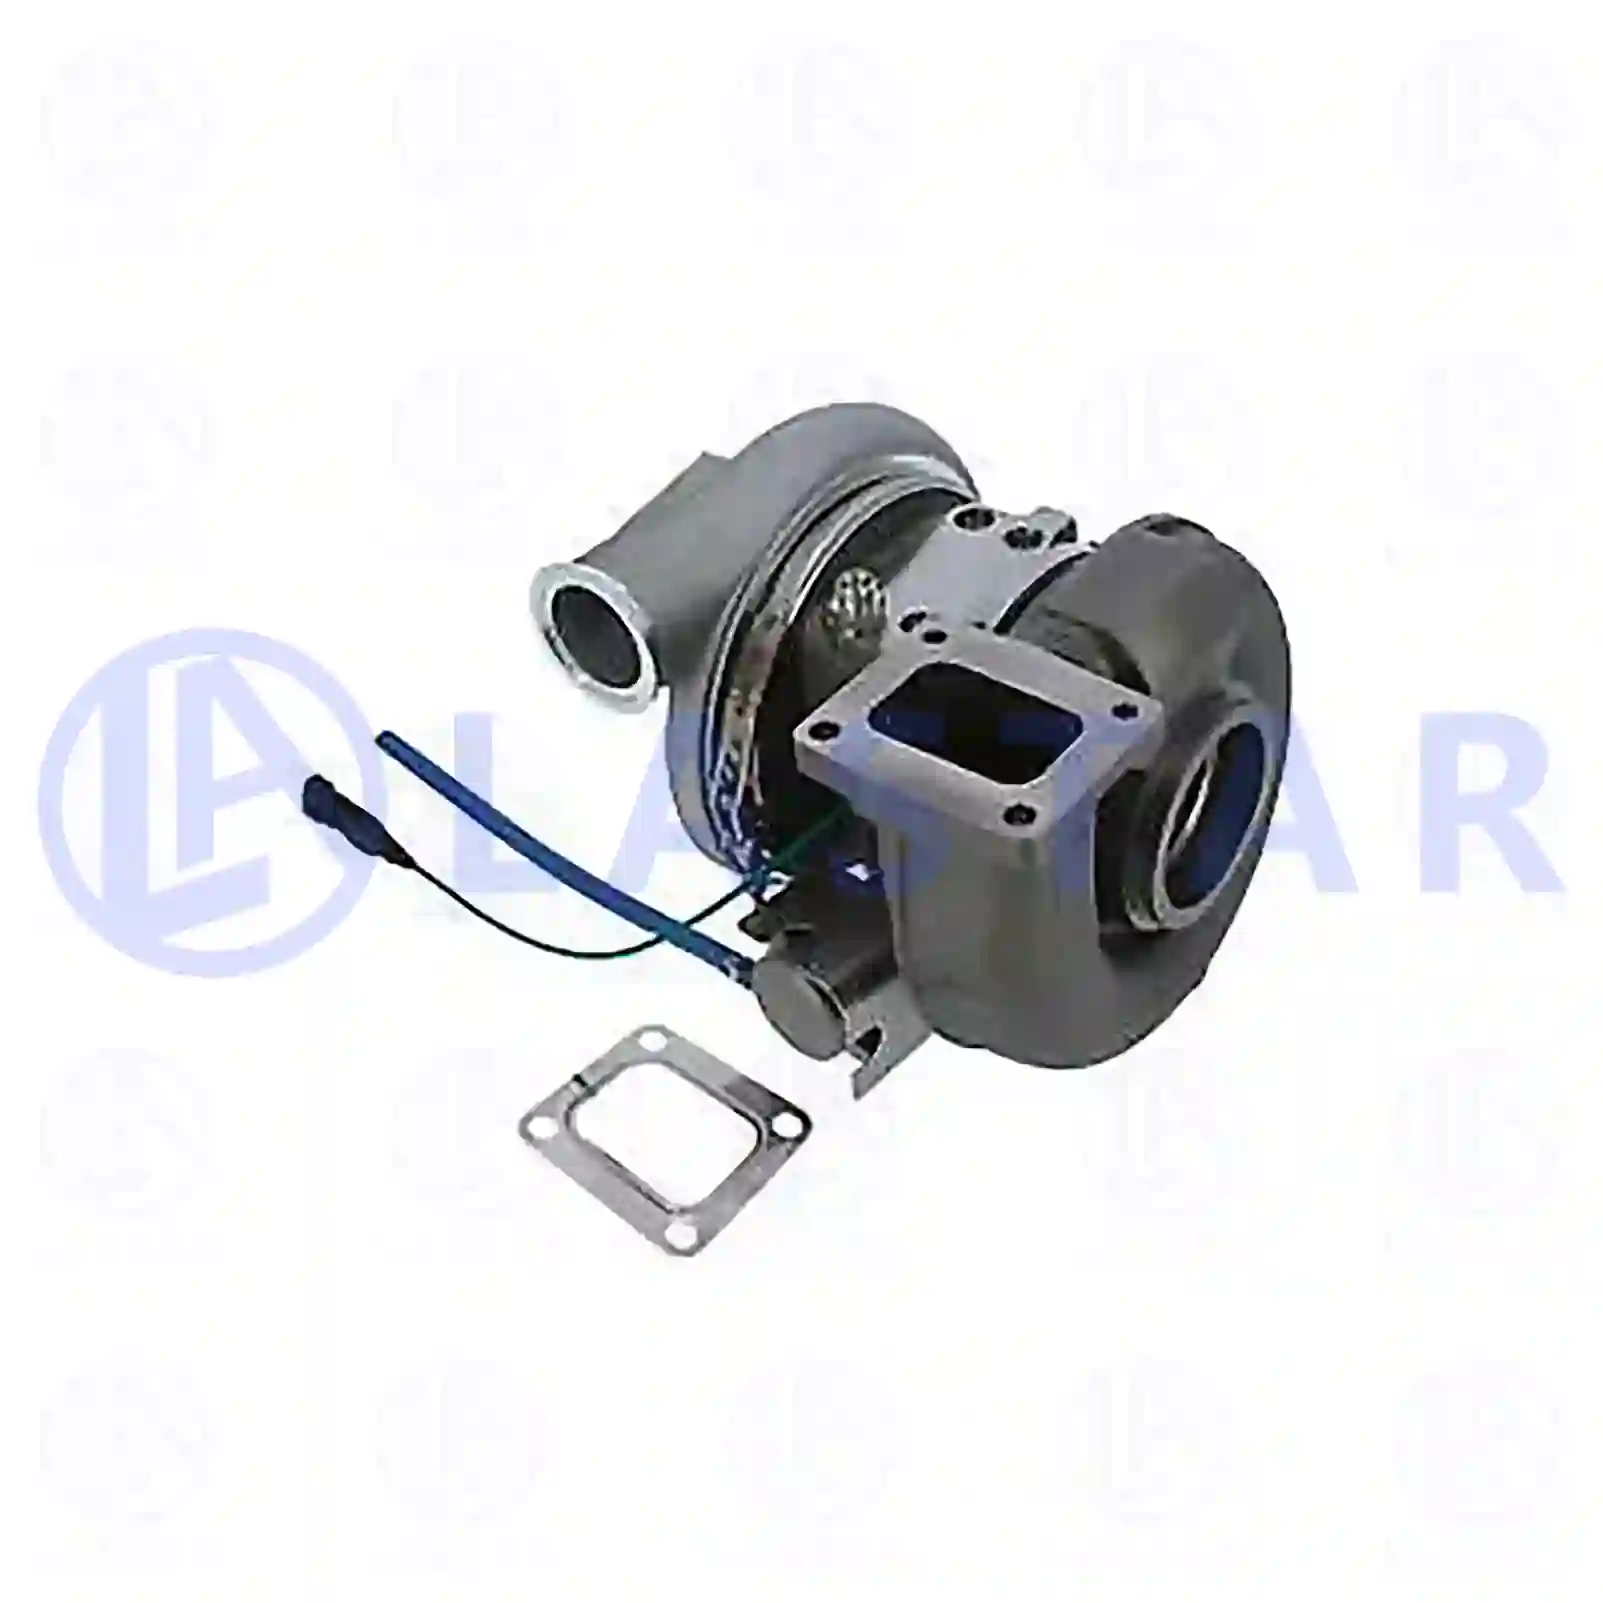 Turbocharger, with gasket kit, 77700426, 02992105, 02998328, 2992105, 2998328, 500370582, 500370592, 504003367, 504044516, 504255233 ||  77700426 Lastar Spare Part | Truck Spare Parts, Auotomotive Spare Parts Turbocharger, with gasket kit, 77700426, 02992105, 02998328, 2992105, 2998328, 500370582, 500370592, 504003367, 504044516, 504255233 ||  77700426 Lastar Spare Part | Truck Spare Parts, Auotomotive Spare Parts